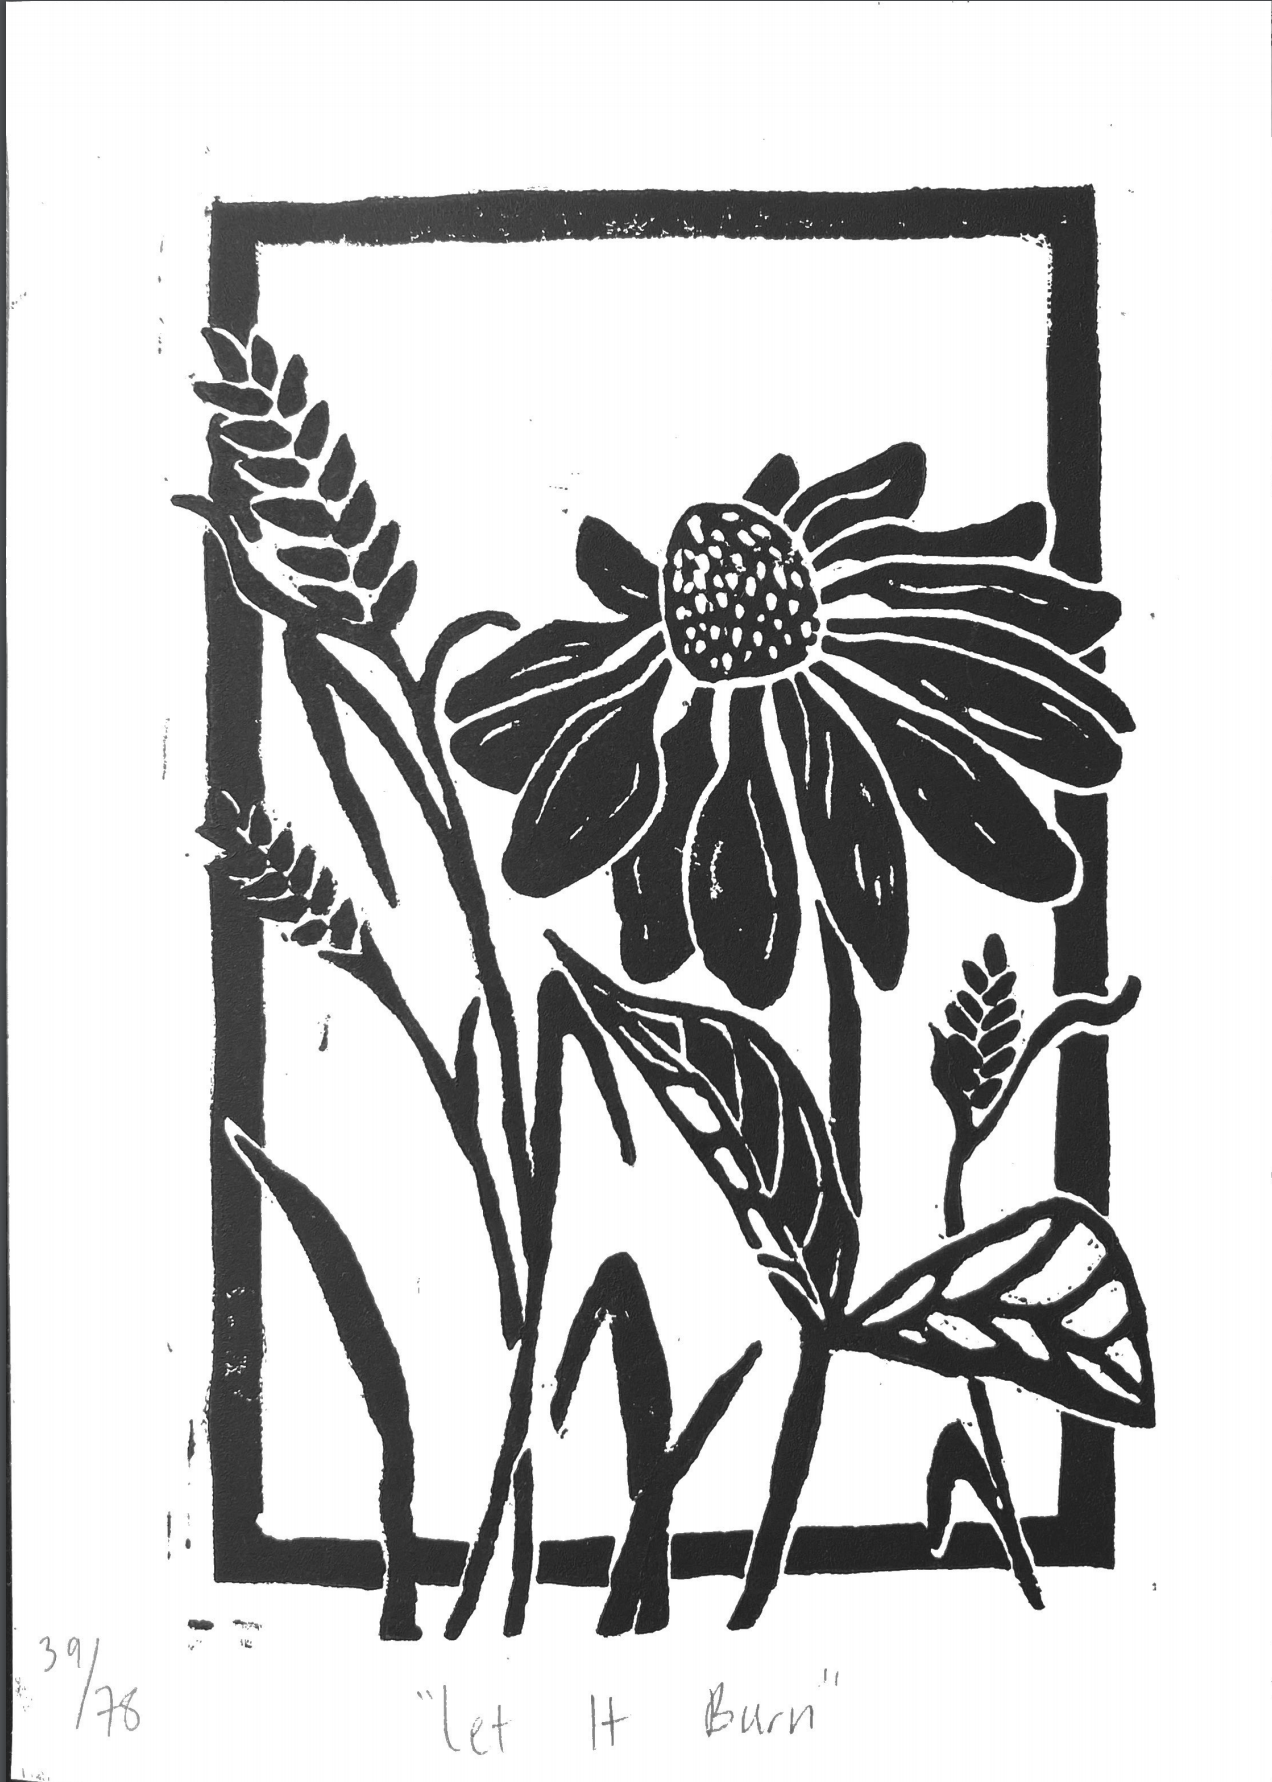 Print Titled "let it Burn" image shows black and white flowers